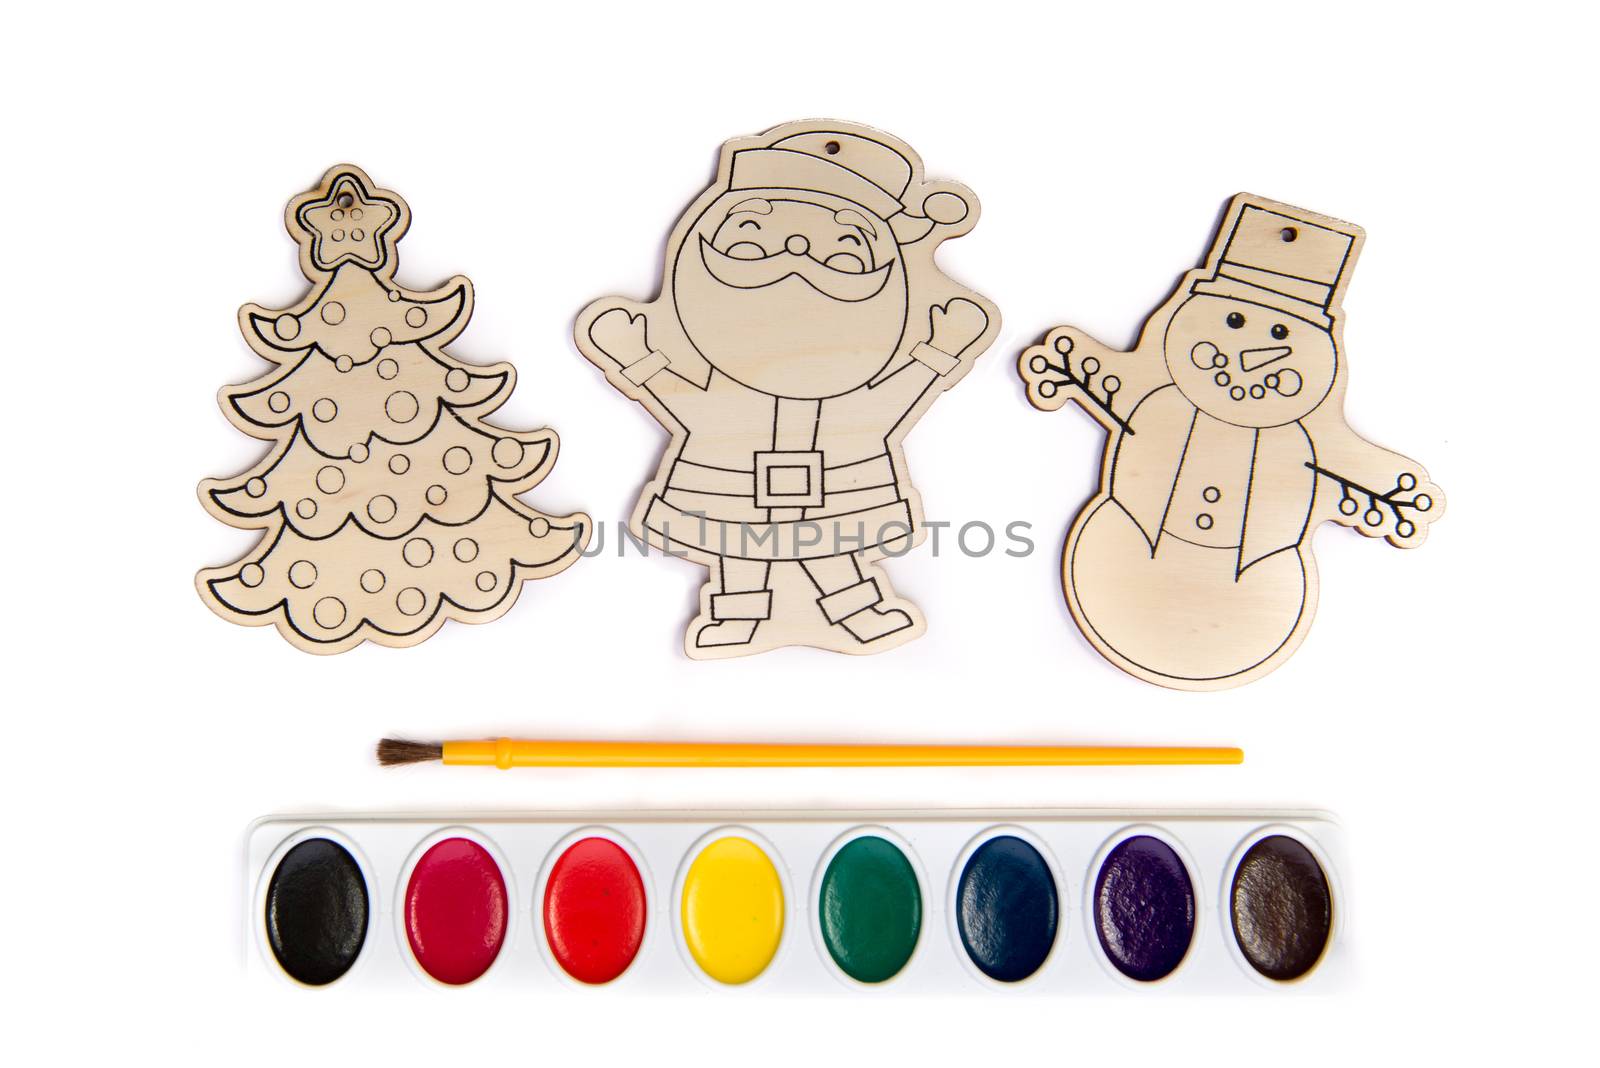 Wood craft shapes or wooden cutouts including Santa, Christmas Tree, and Snowman with paint brush and watercolor set.